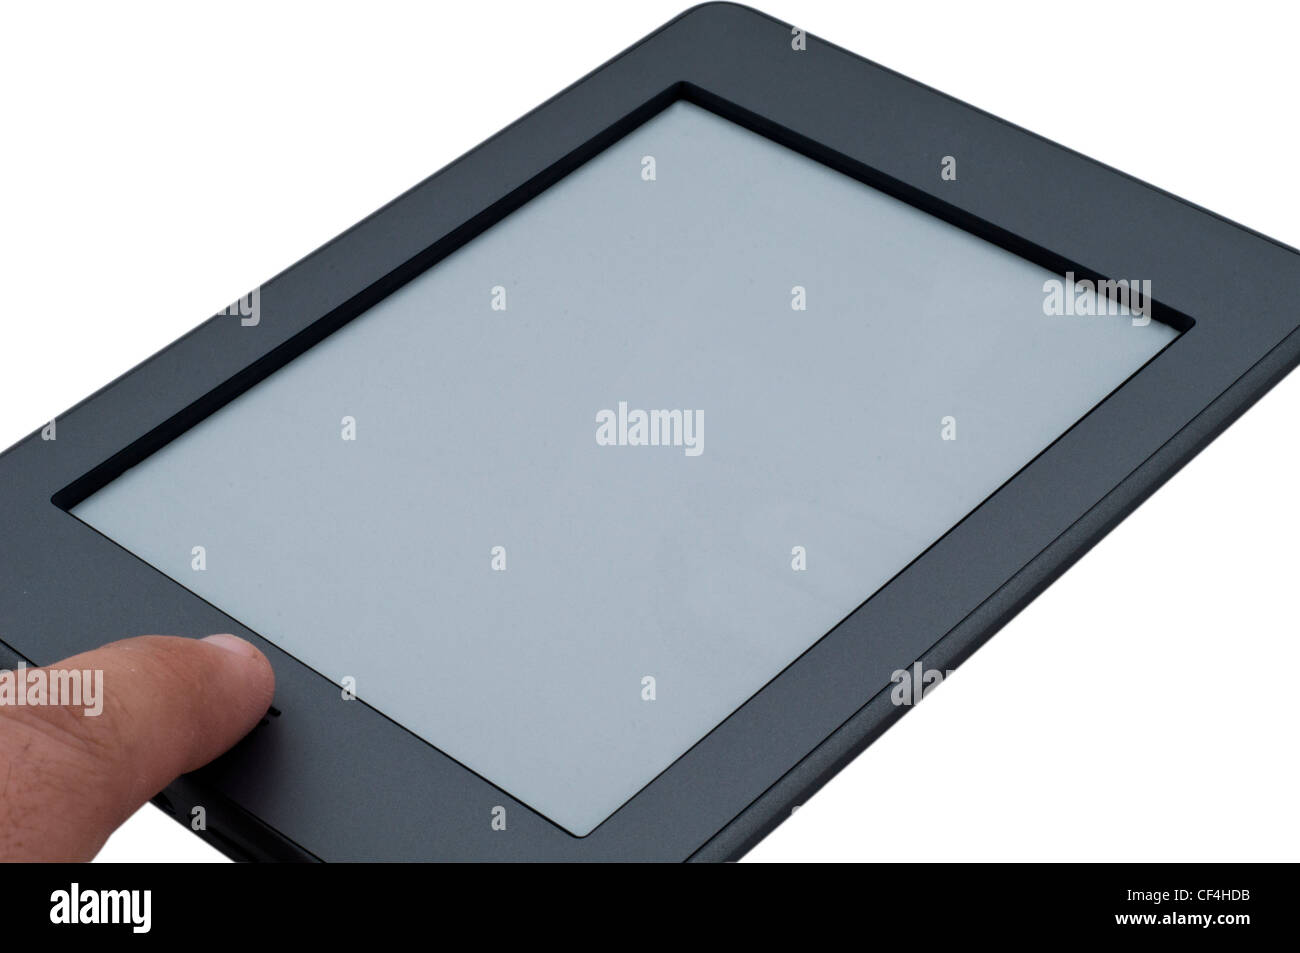 Guy pressing button of Ebook reader device on isolated white background Stock Photo